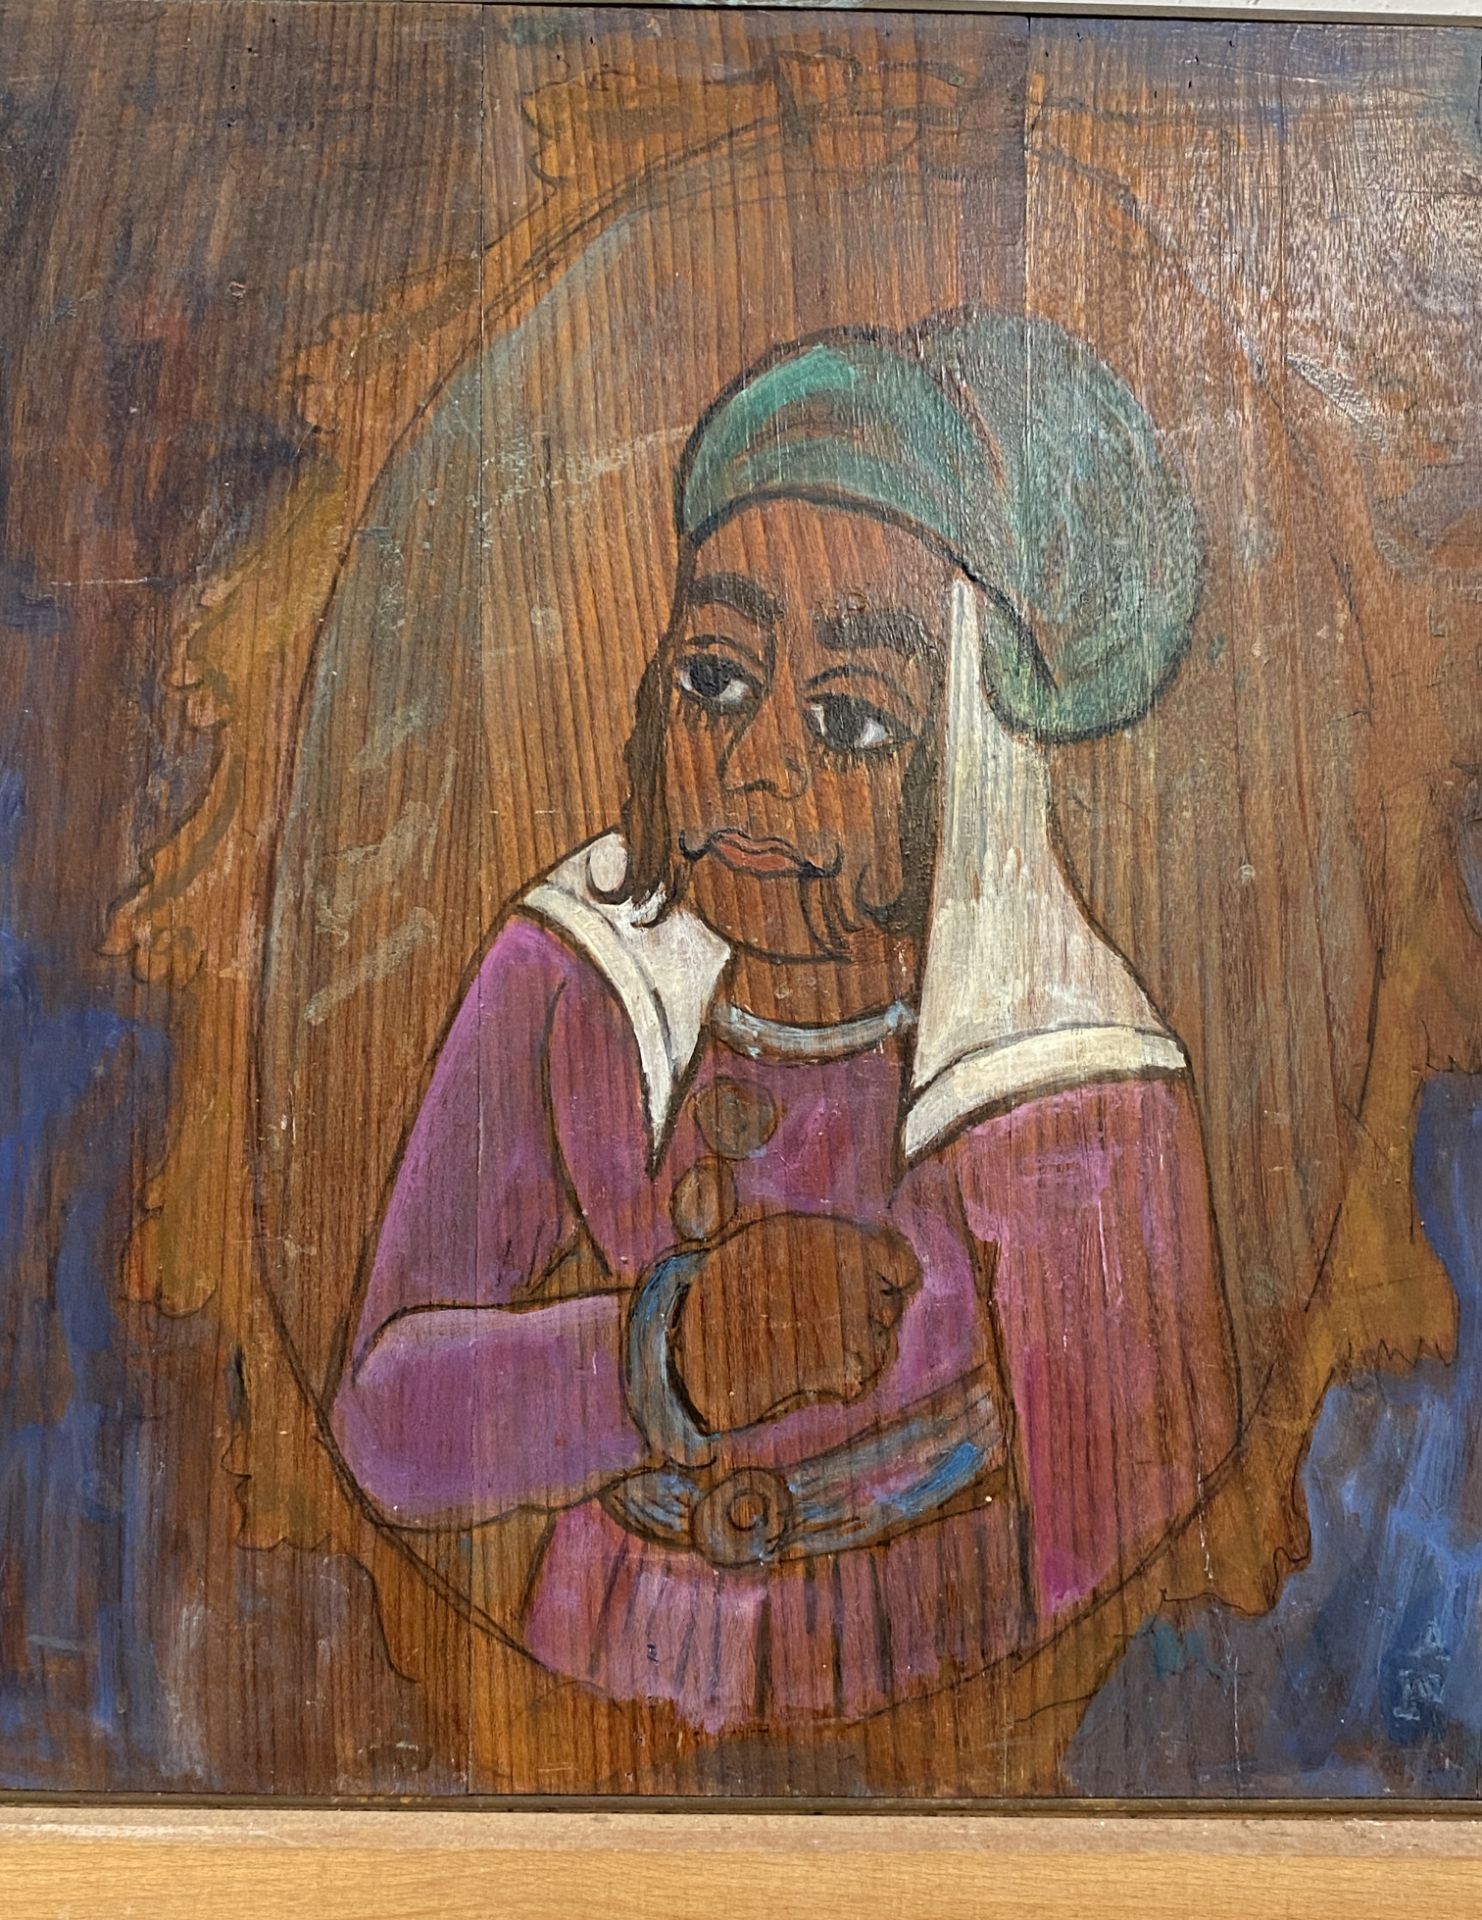 Painting on wood "Persian Prince", by Alex Porter - Image 4 of 4